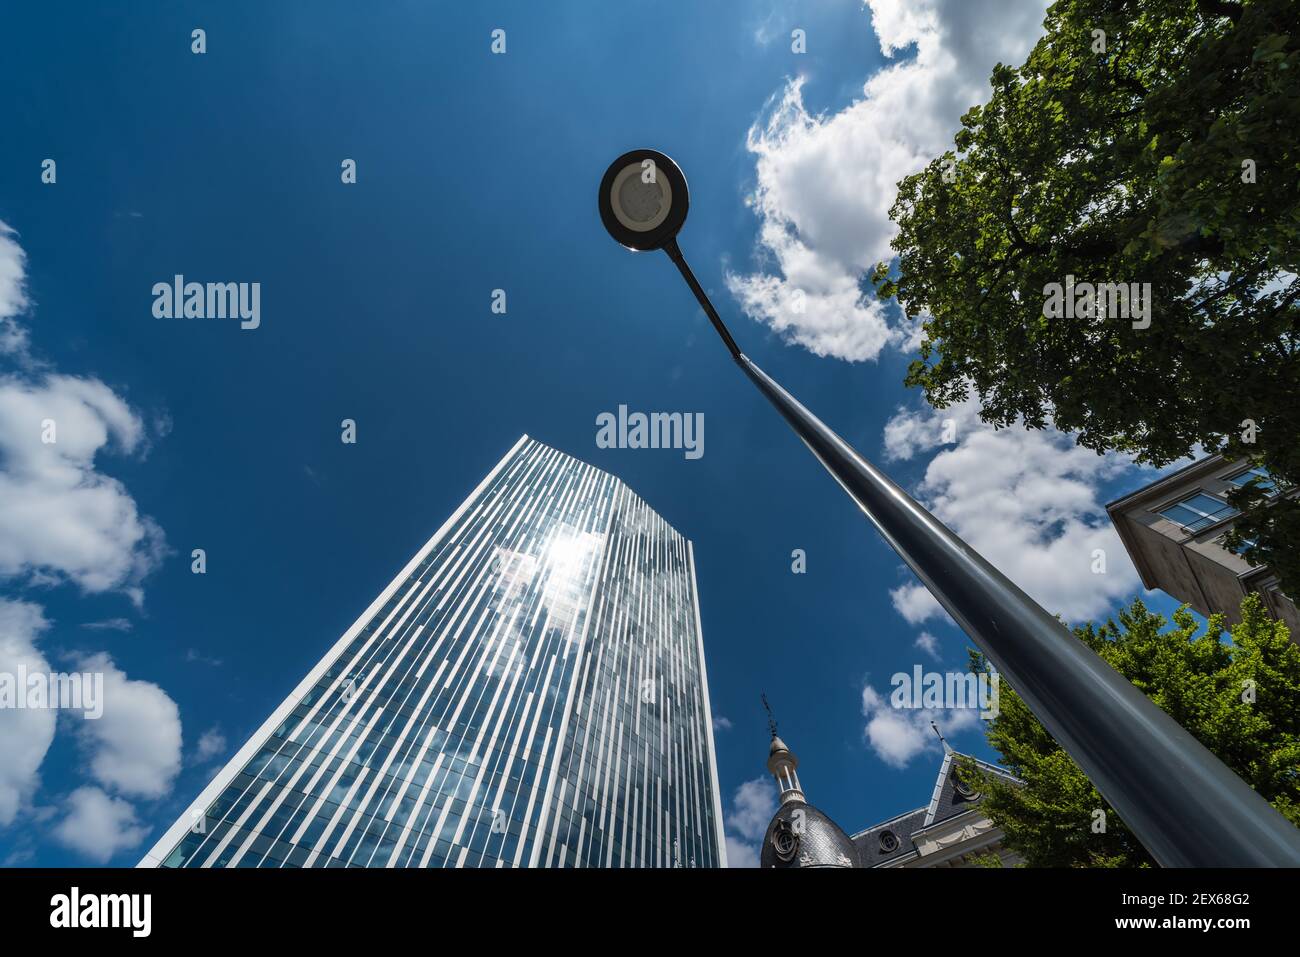 Saint - Josse, Brussels Capital Region / Belgium - 05 20 2020: View of the Astro tower with blue sky, with the Actiris and VDAB job offices Stock Photo